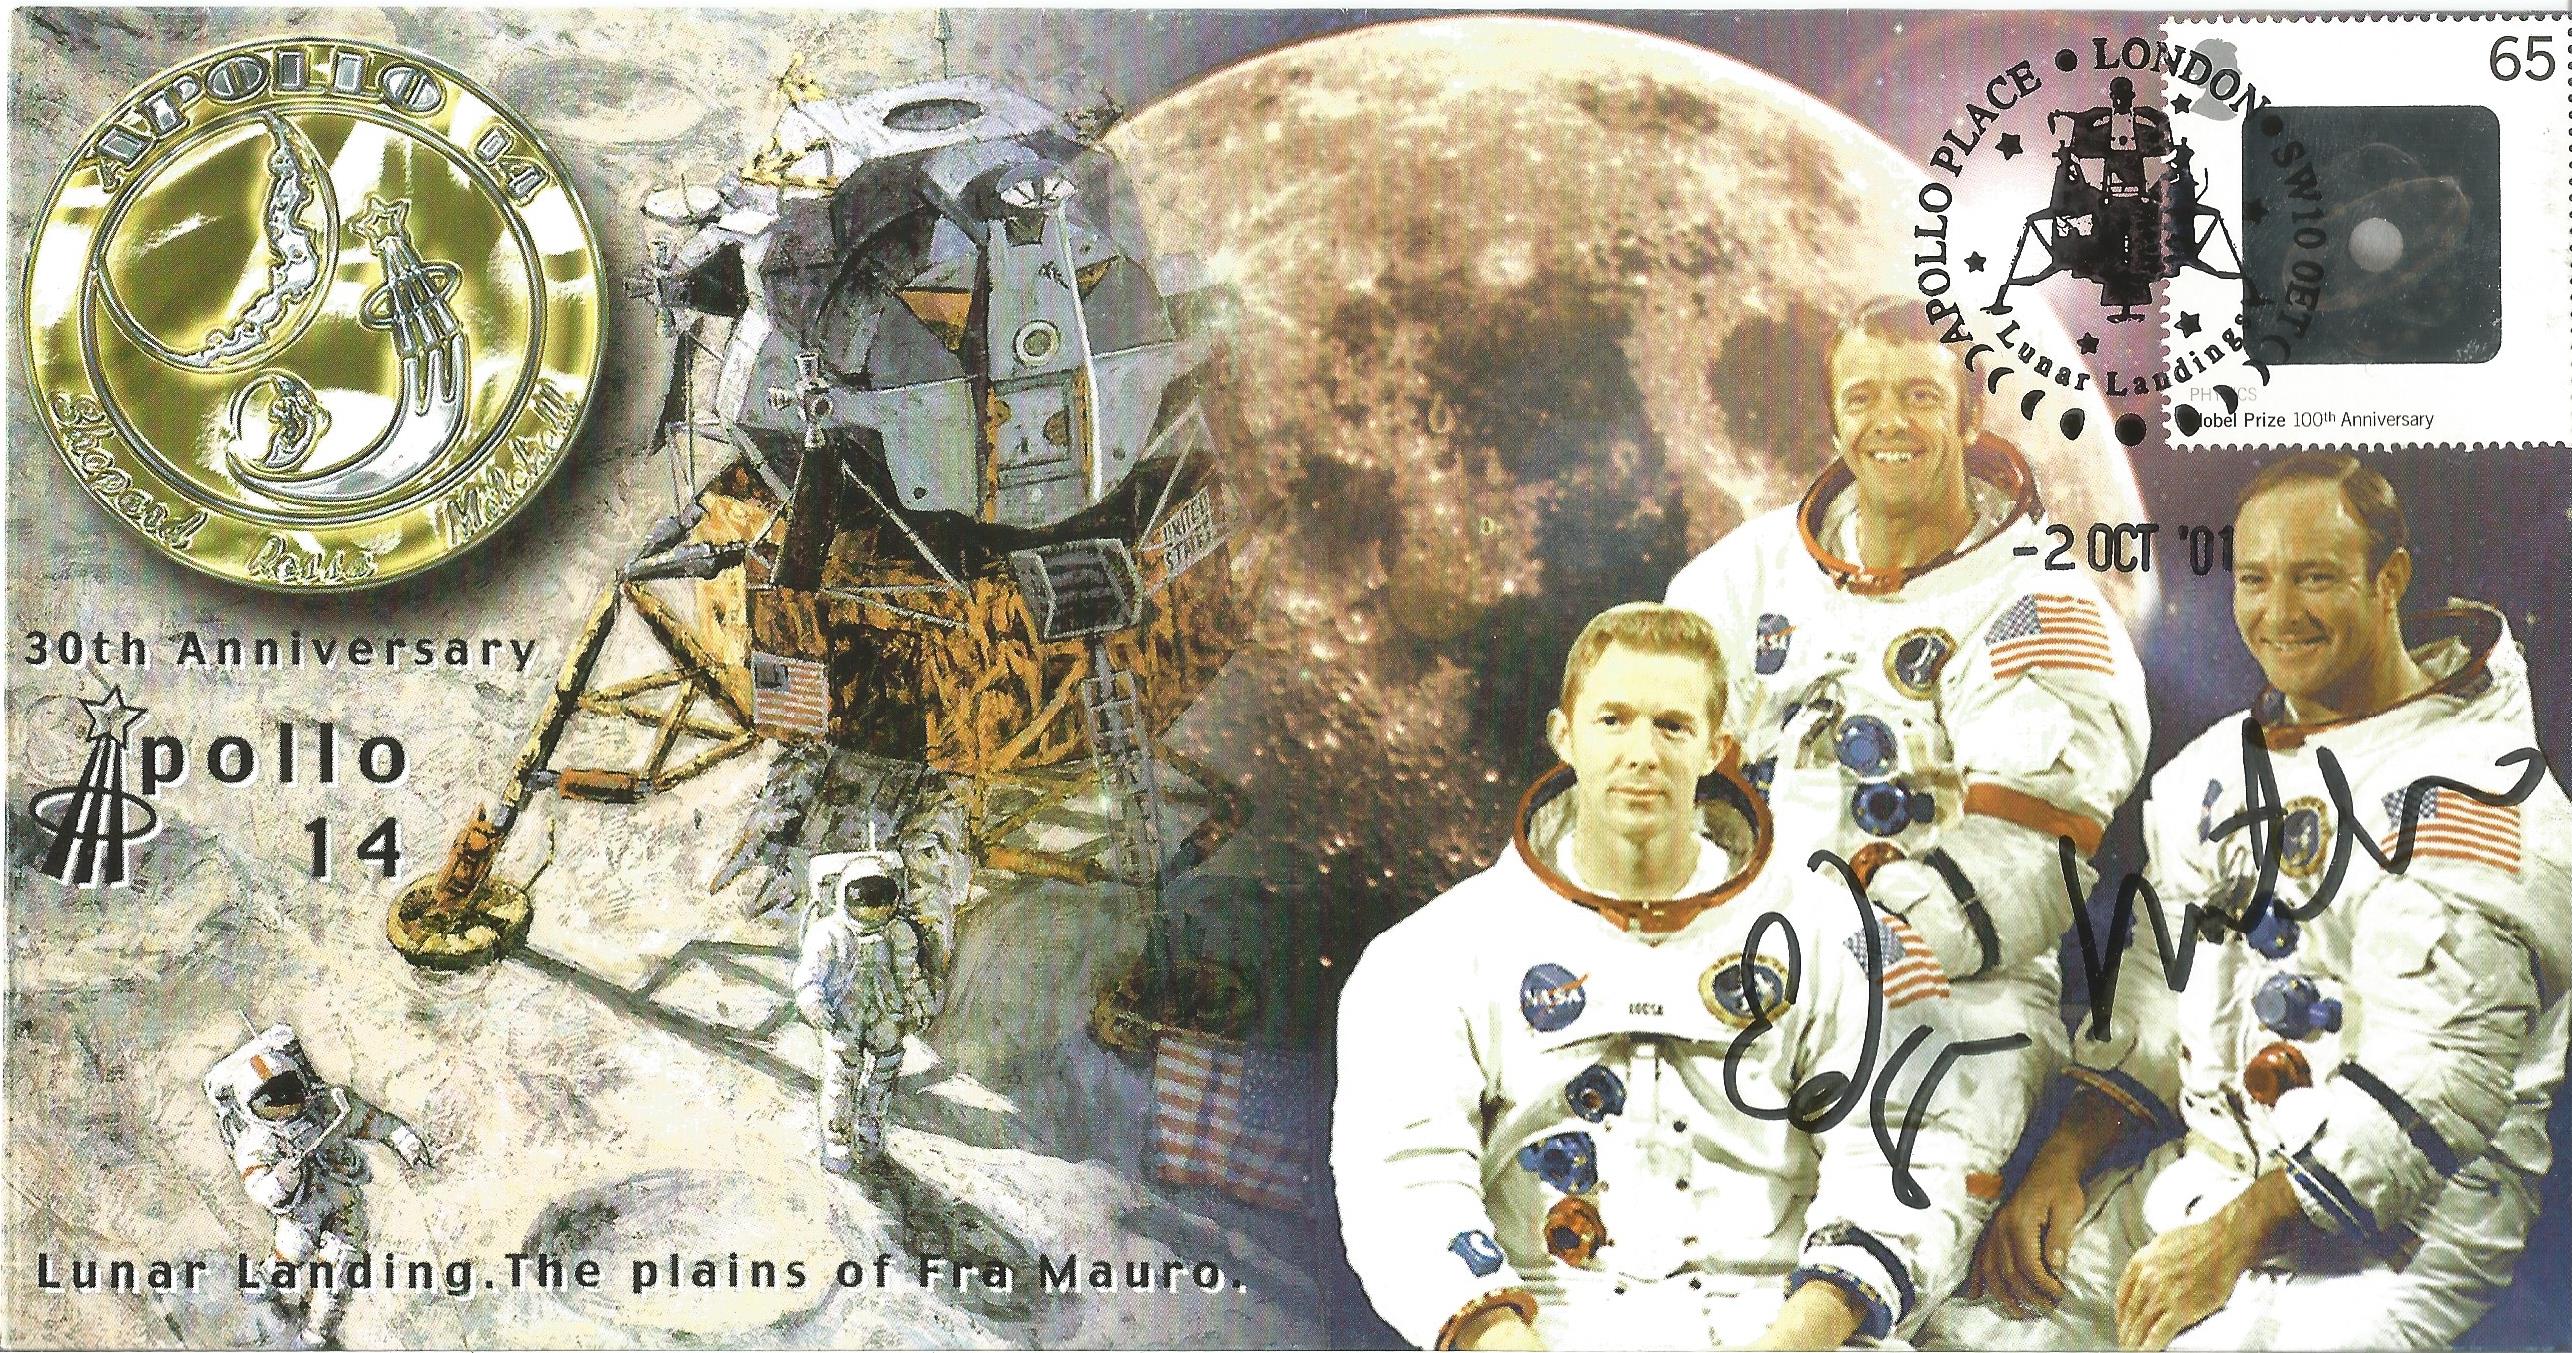 Space Apollo 14 moonwalker astronaut Dr Ed Mitchell signed 2010 Apollo 14 FDC. Good Condition. All